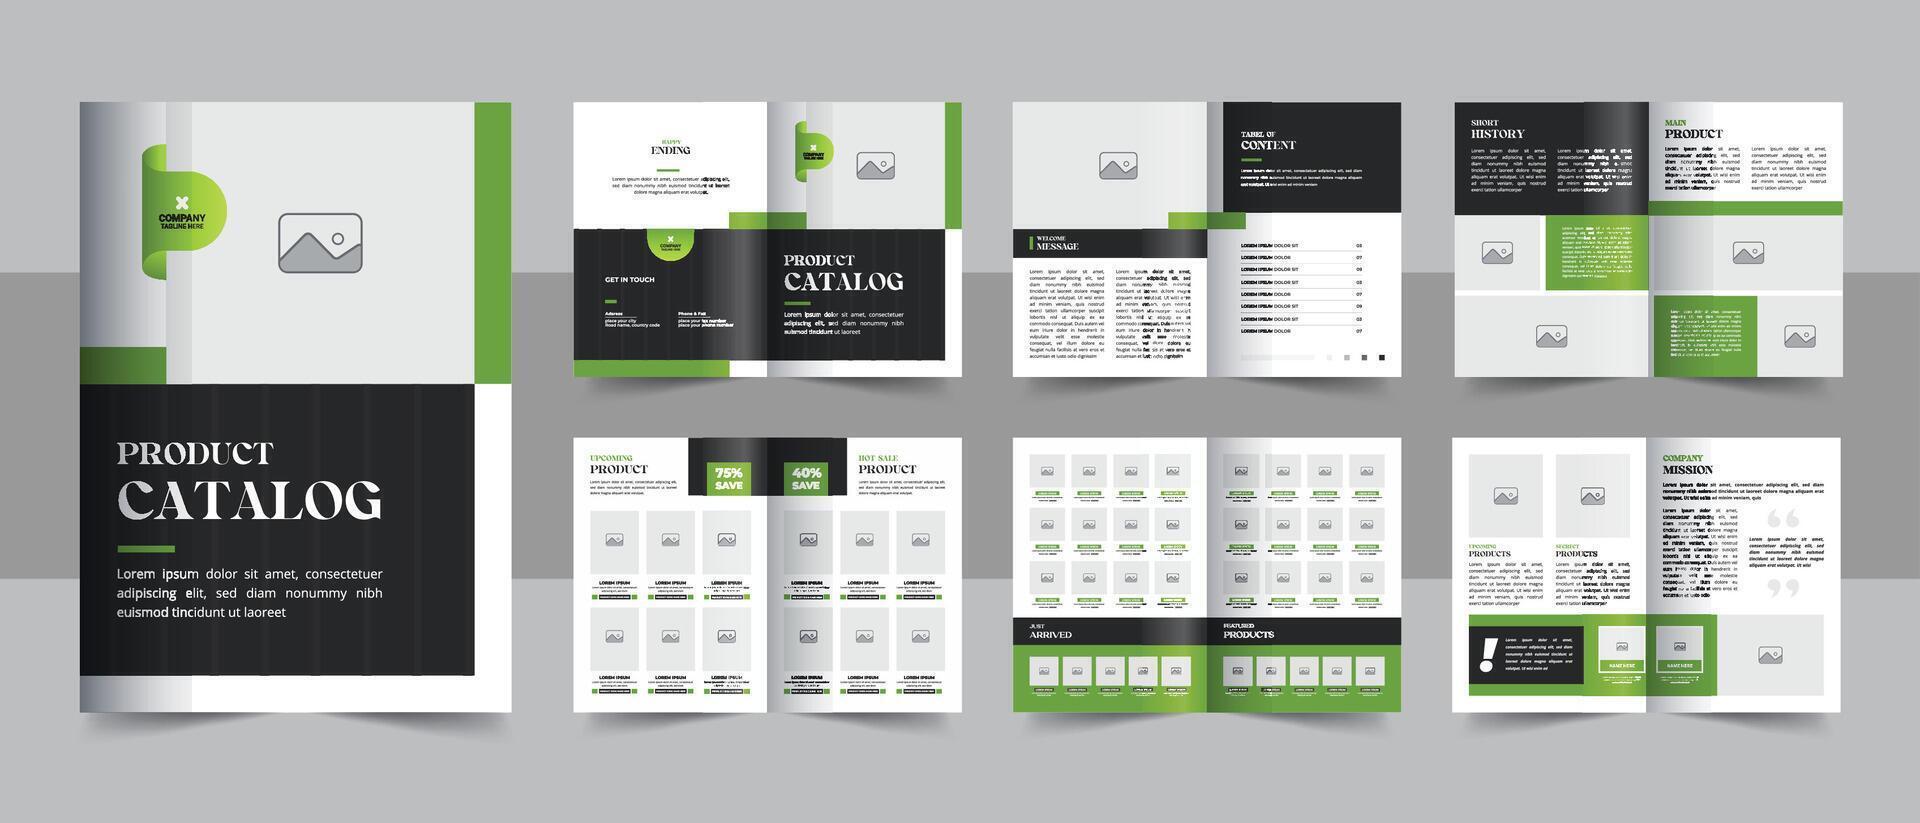 Product catalog design or modern product catalogue template, Company product catalog portfolio layout with product list vector